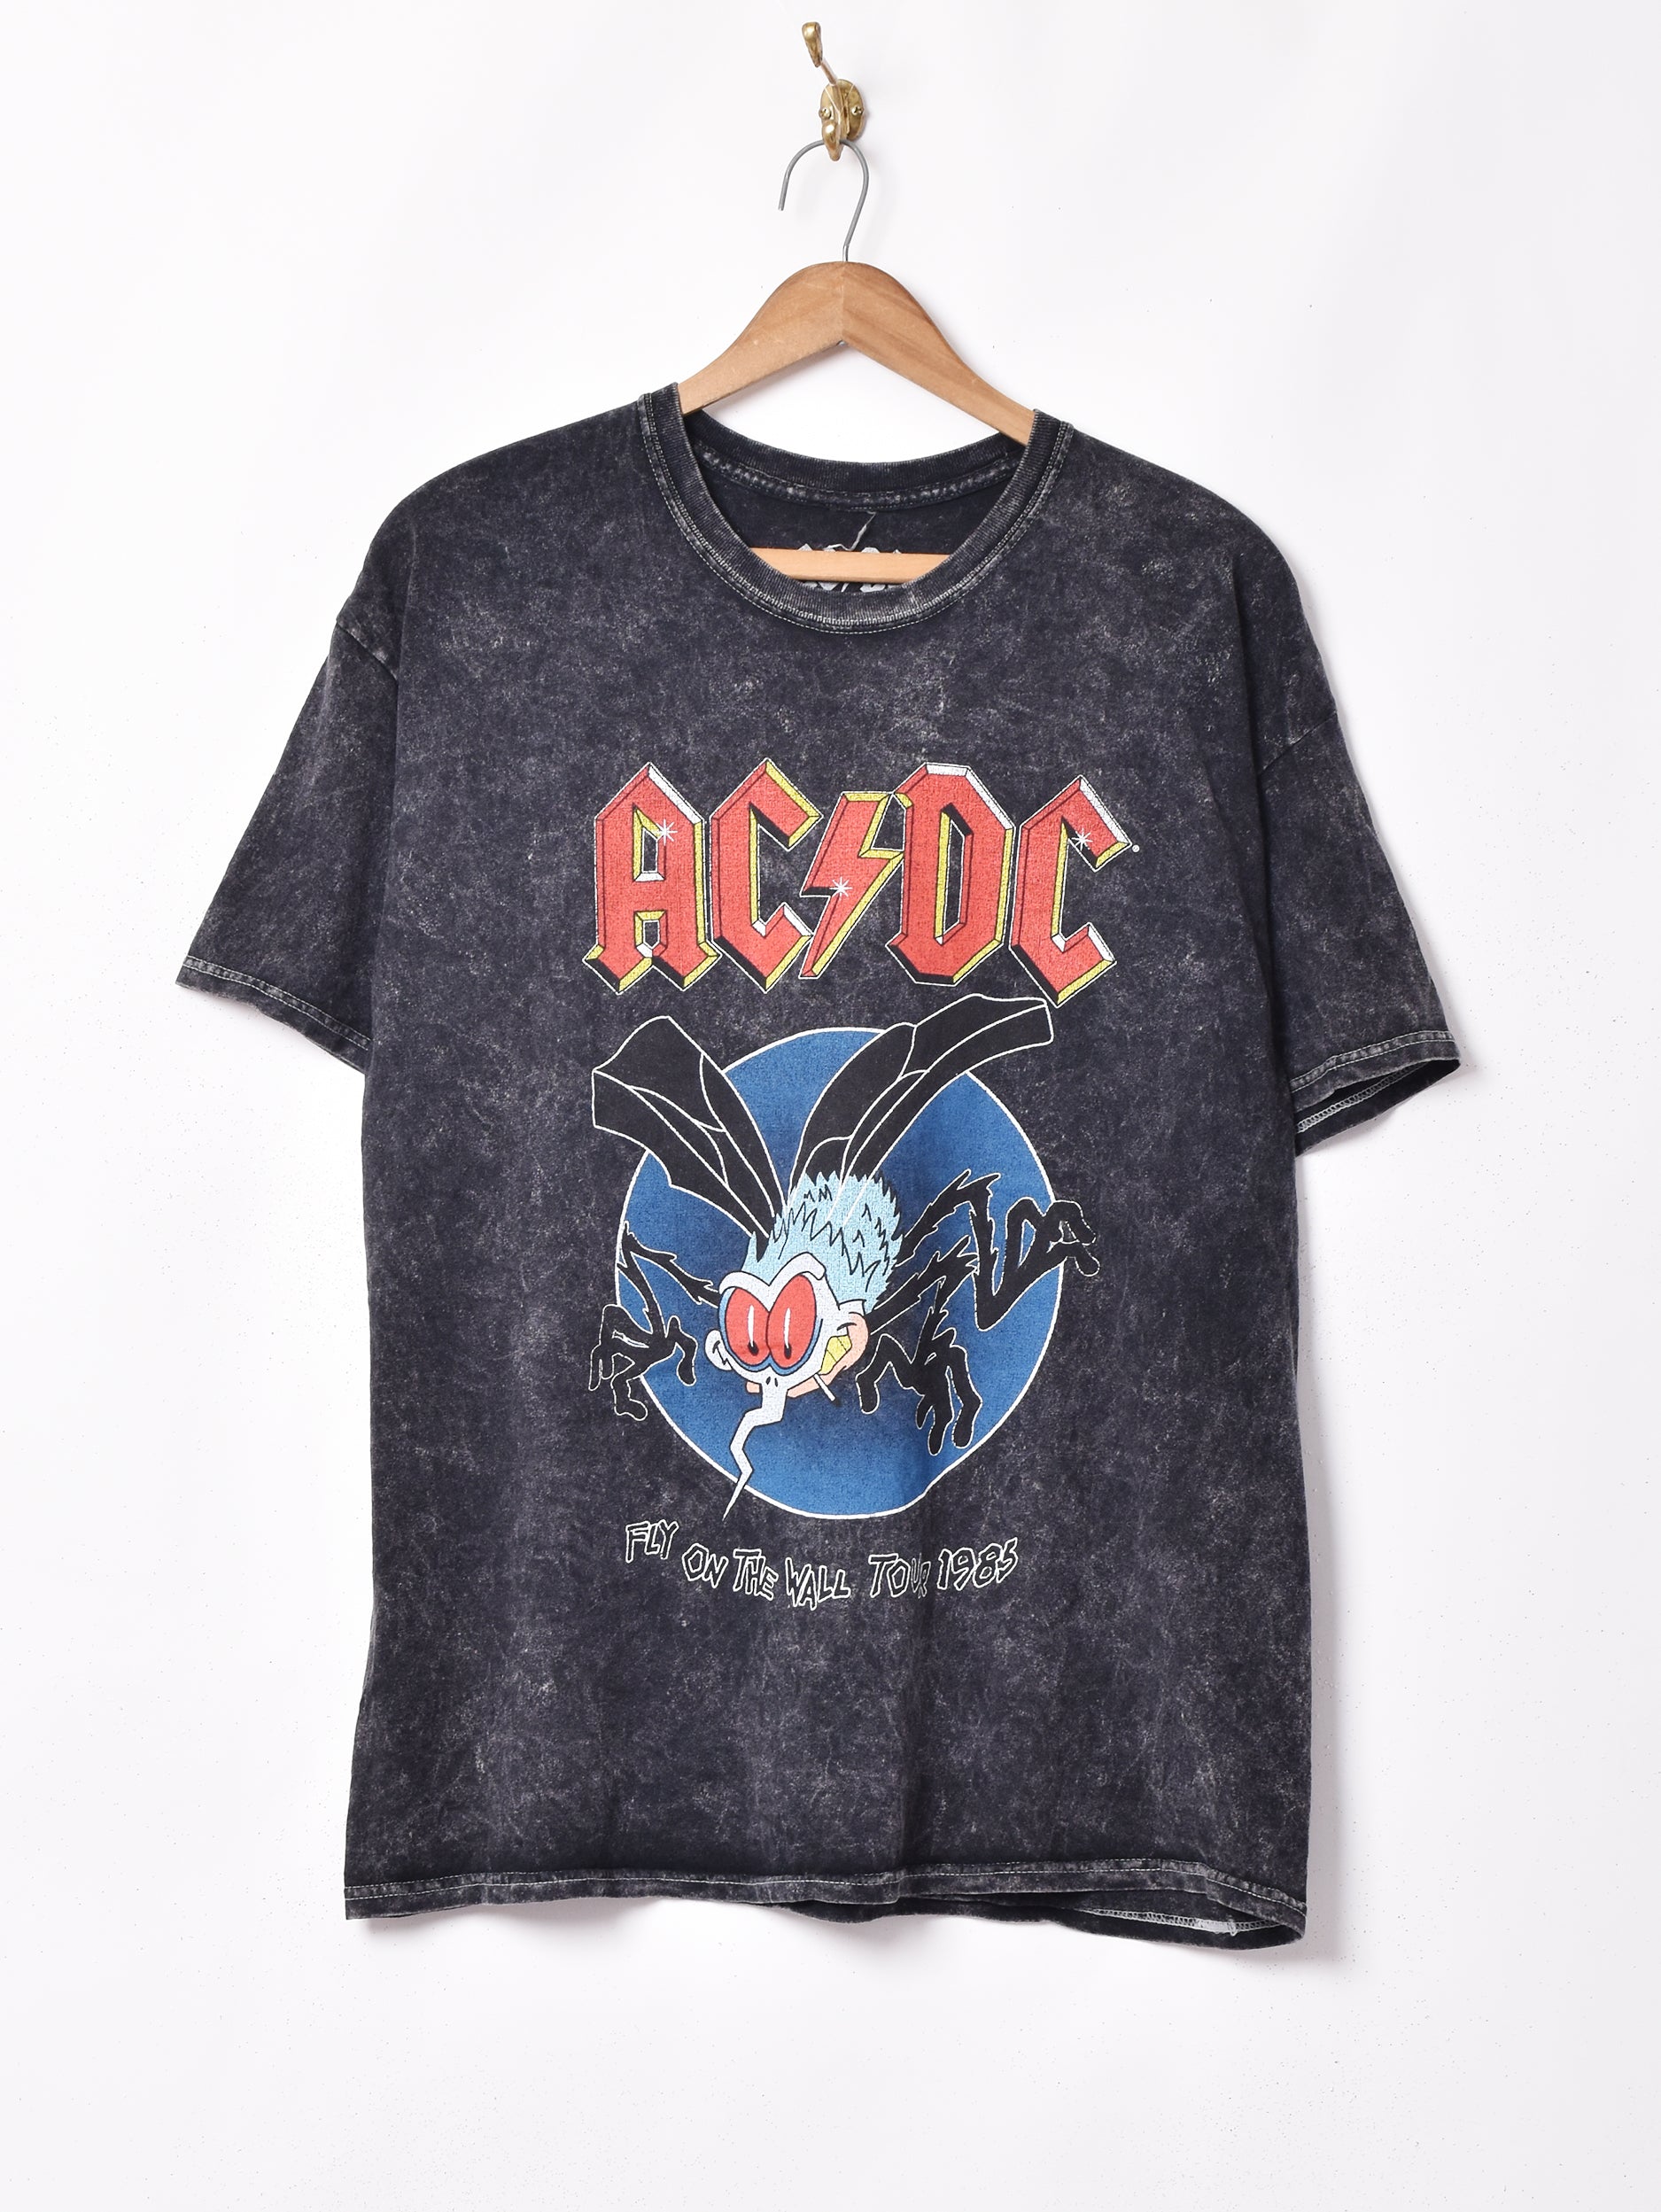 ACDC 1985年 FLY ON WALLTOUR Tシャツ – 古着屋Top of the Hill